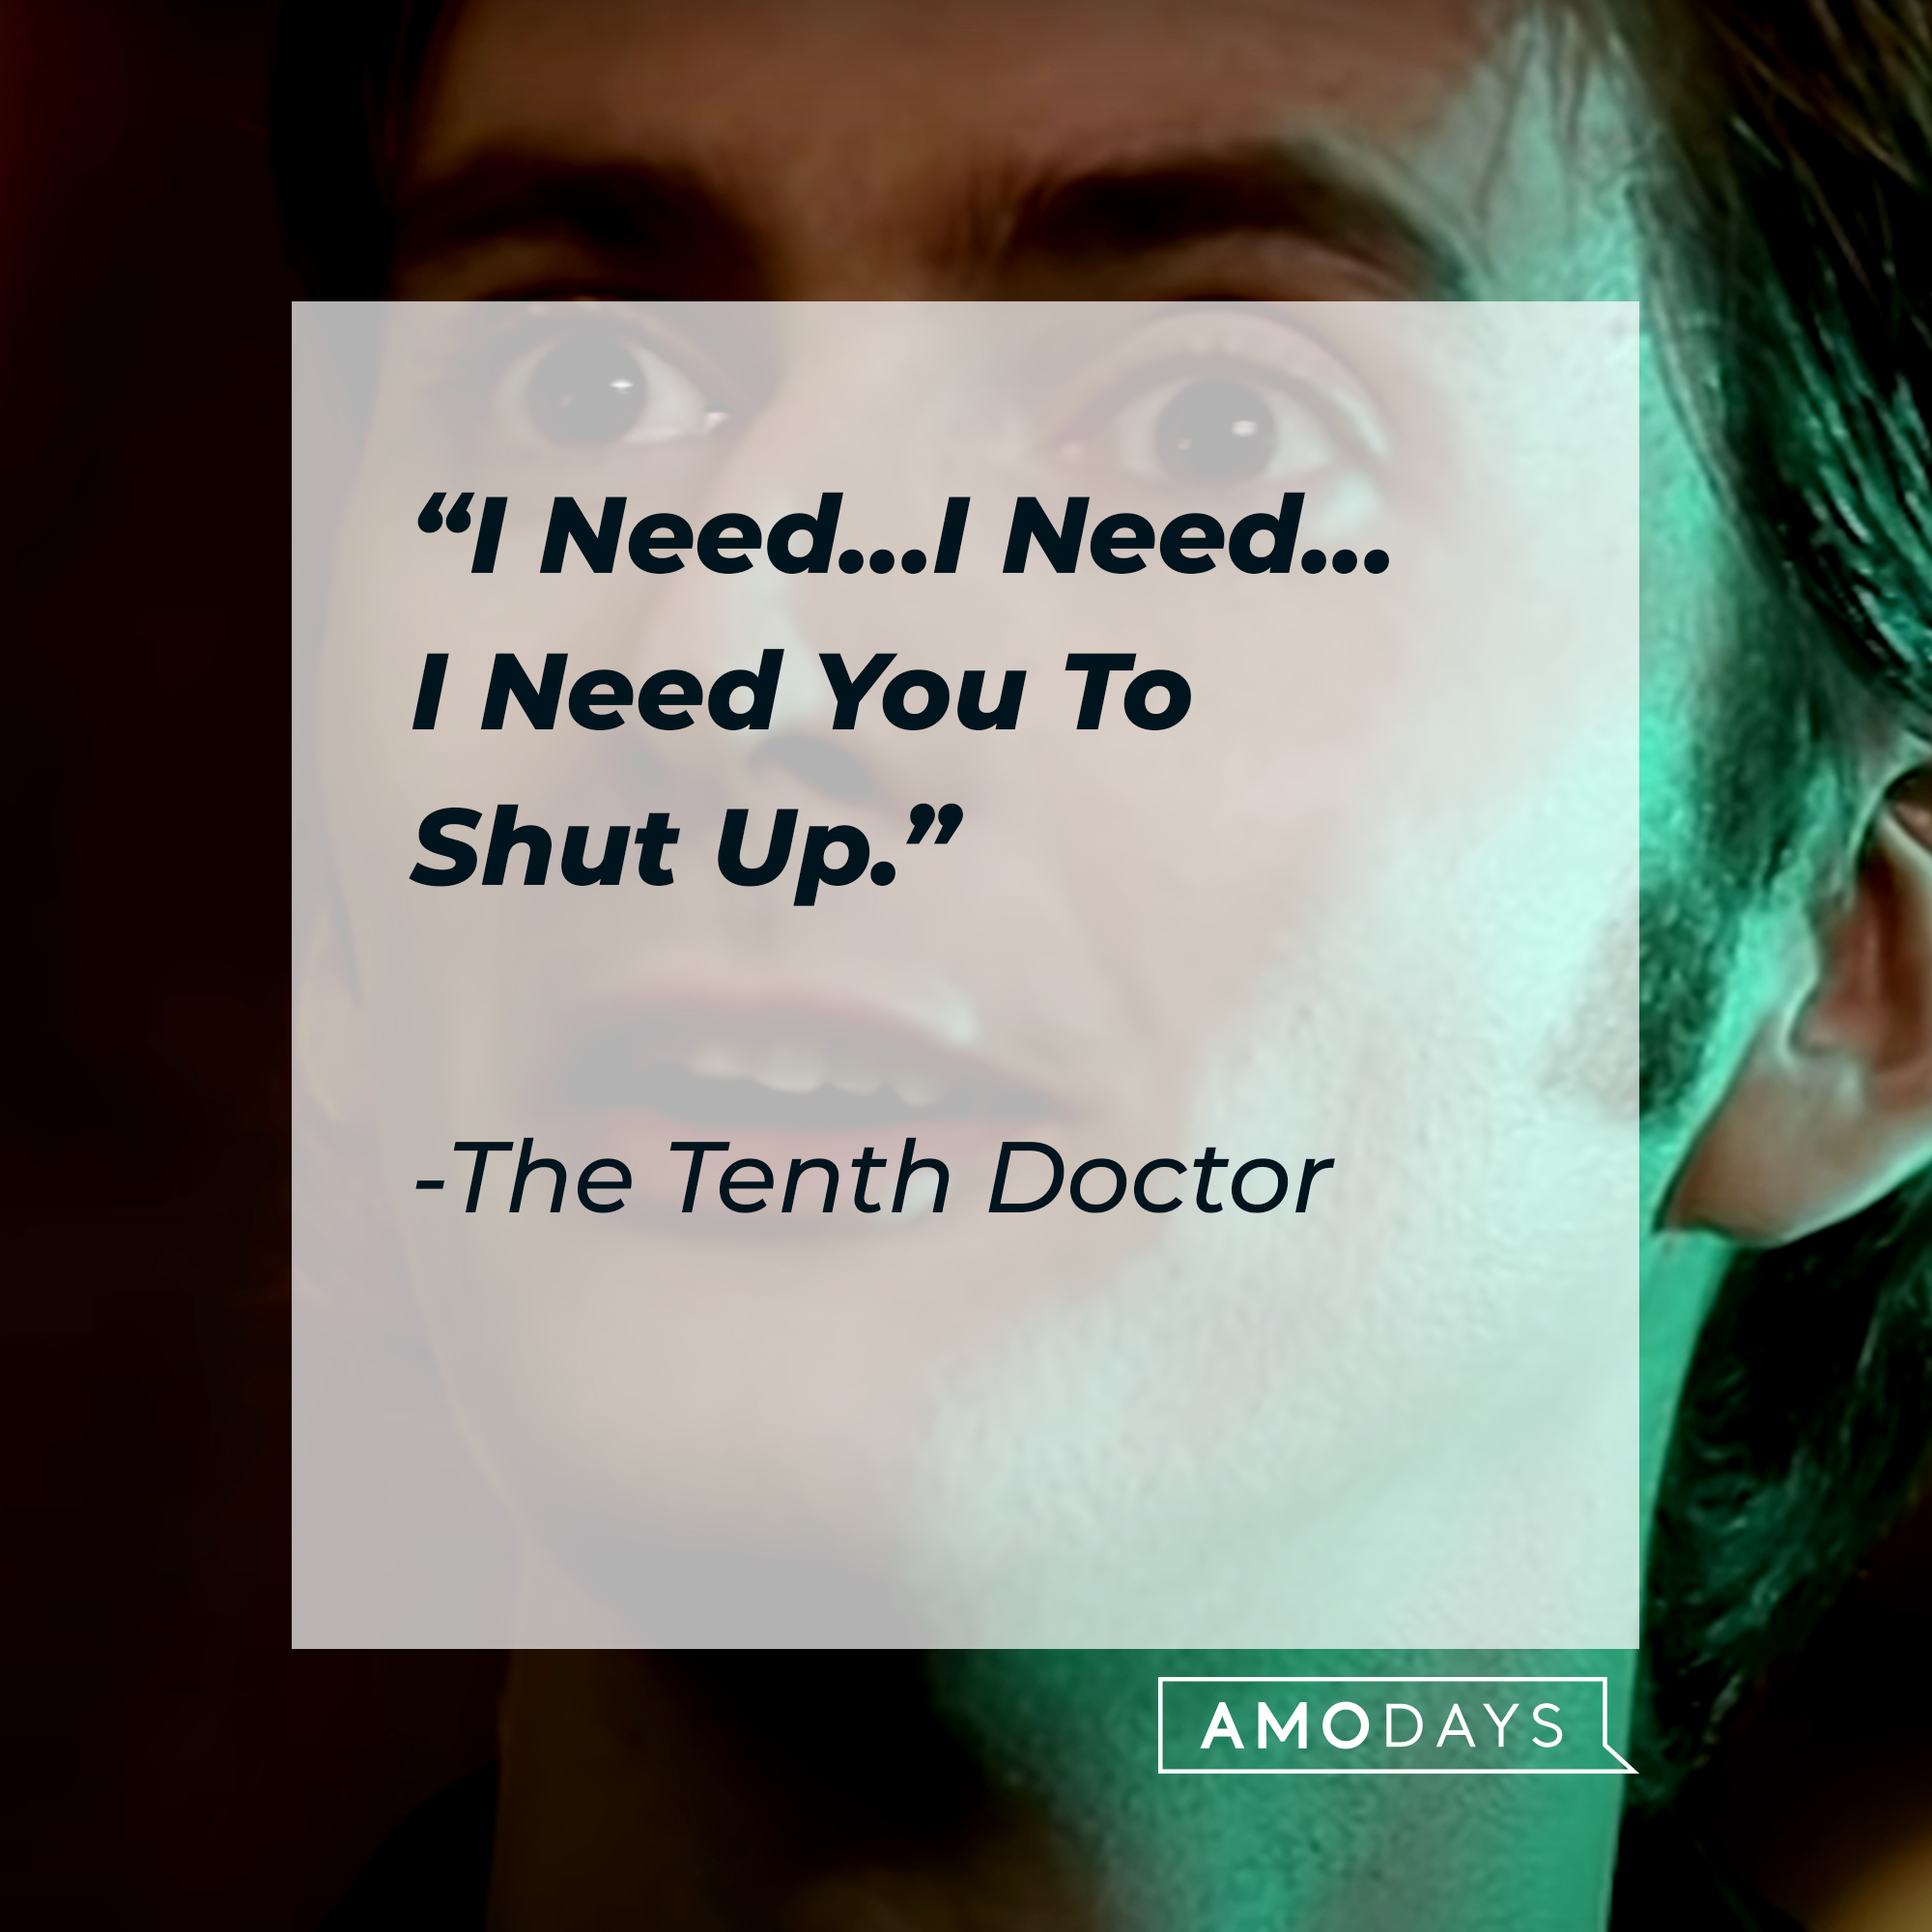 The Tenth Doctor's quote: "I Need...I Need... I Need You To Shut Up." | Source: youtube.com/DoctorWho